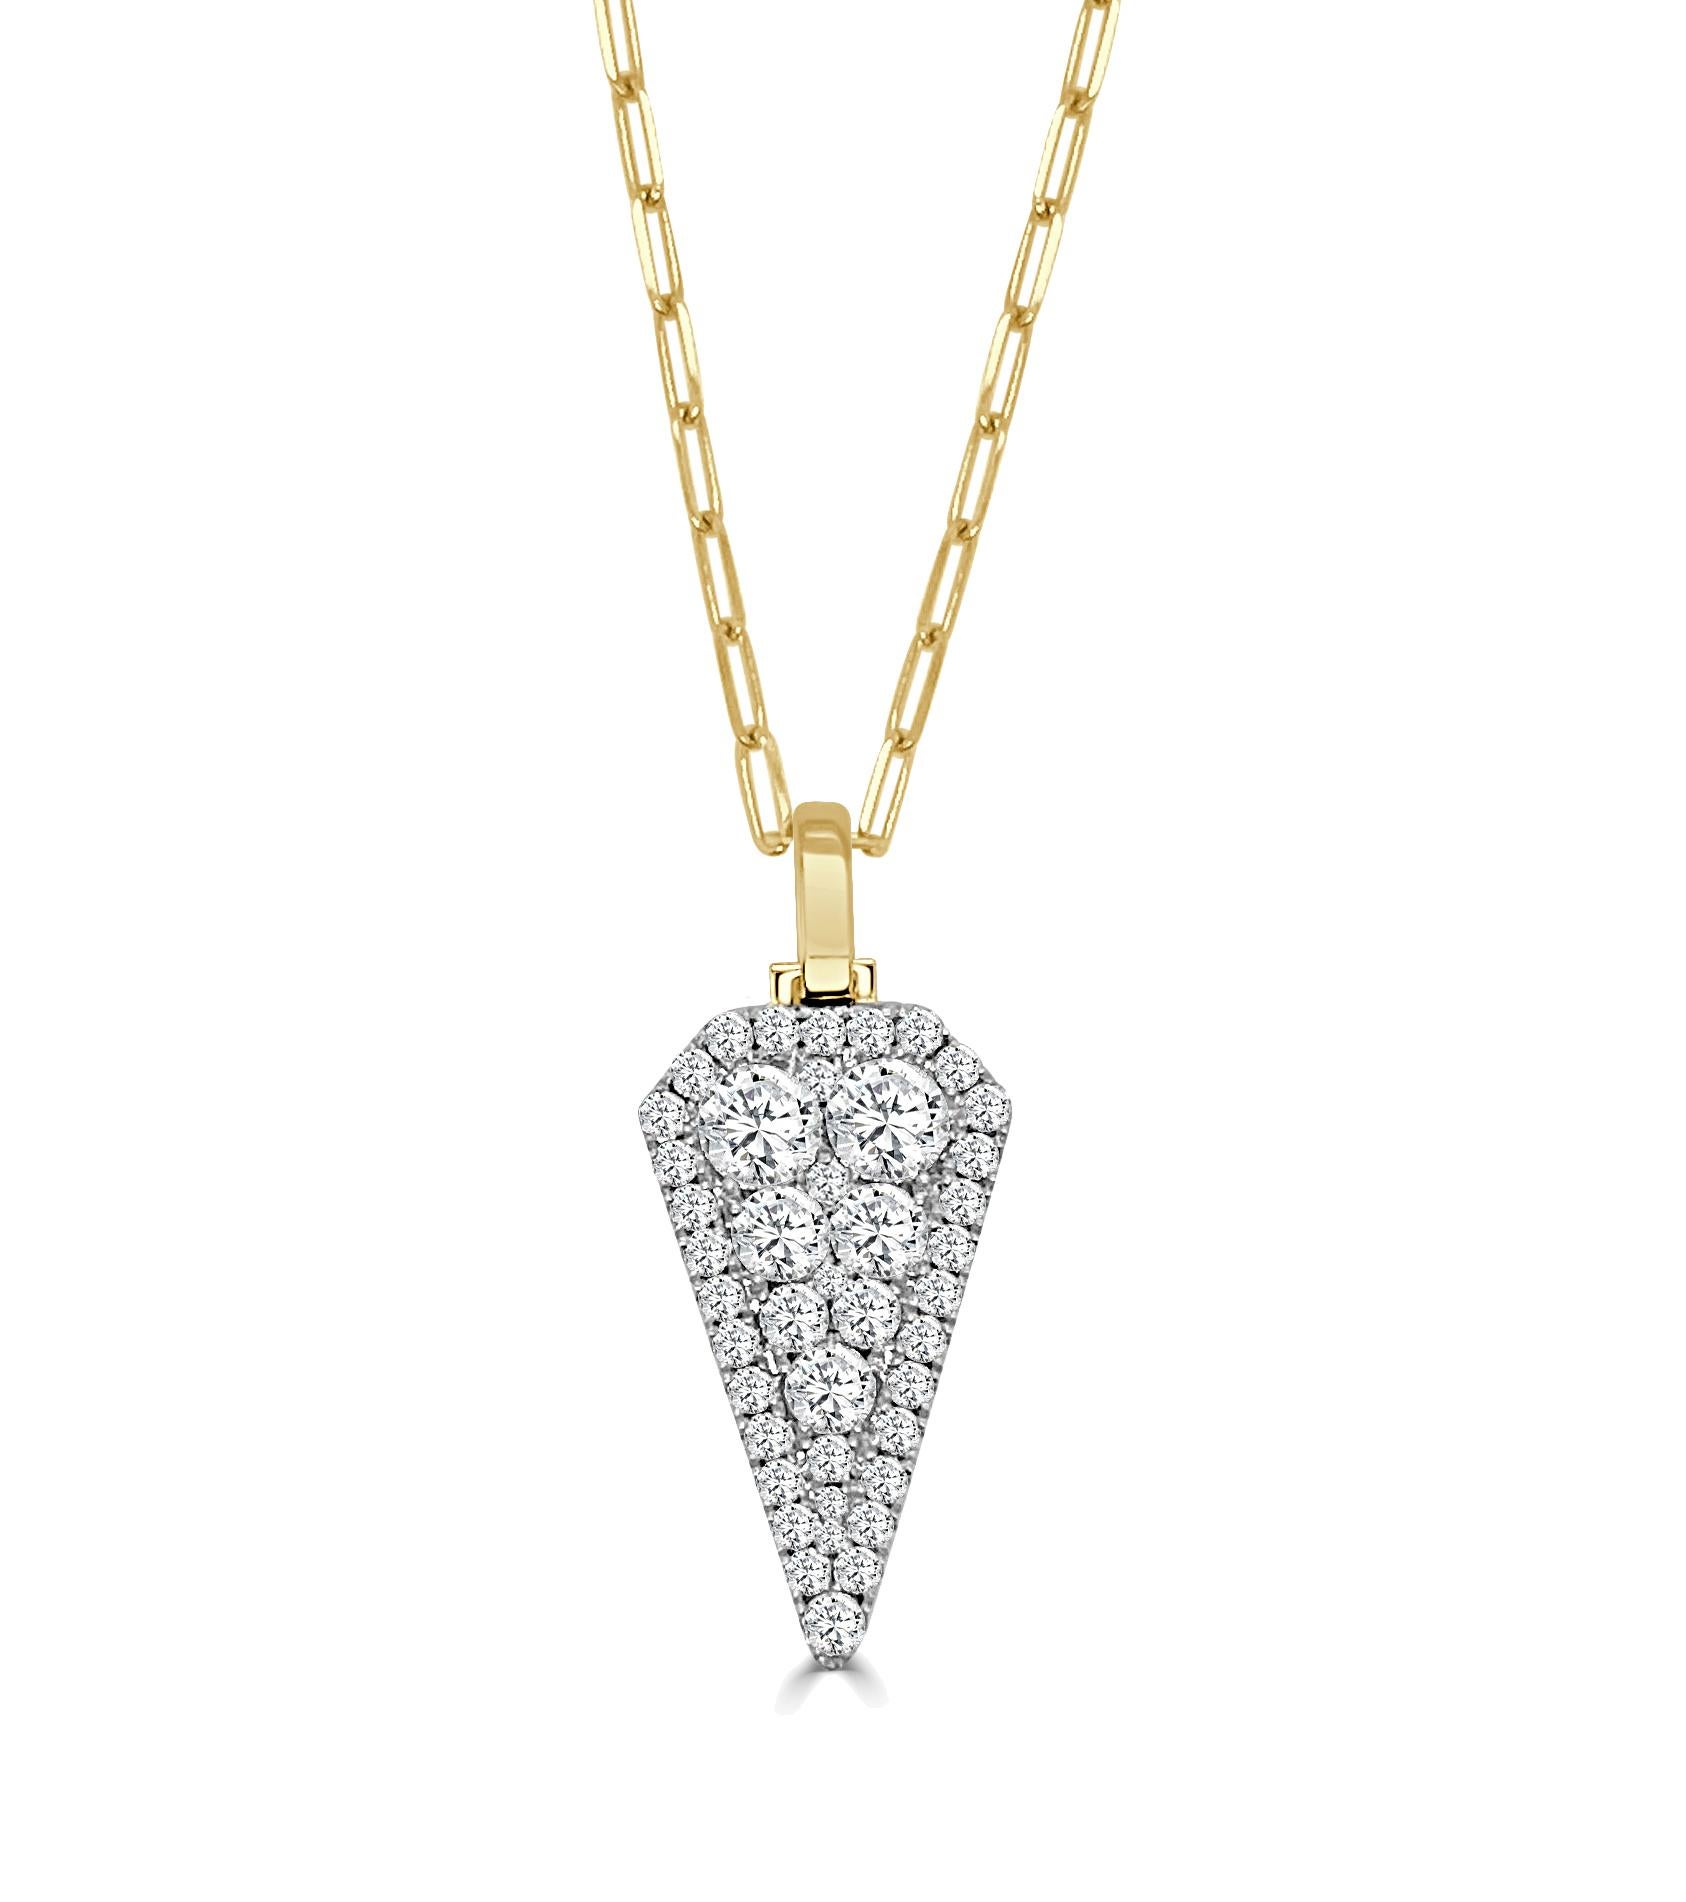 Large Arrow All Diamond Pendant With Polished Bale With Mini Paper Clip Chain, 1.27 Ct, (approximately 12 mm x 21 mm / 27.5 mm including bale)

Available in other metal/ gemstone options: This Diamond pendant can be made in white, pink or yellow